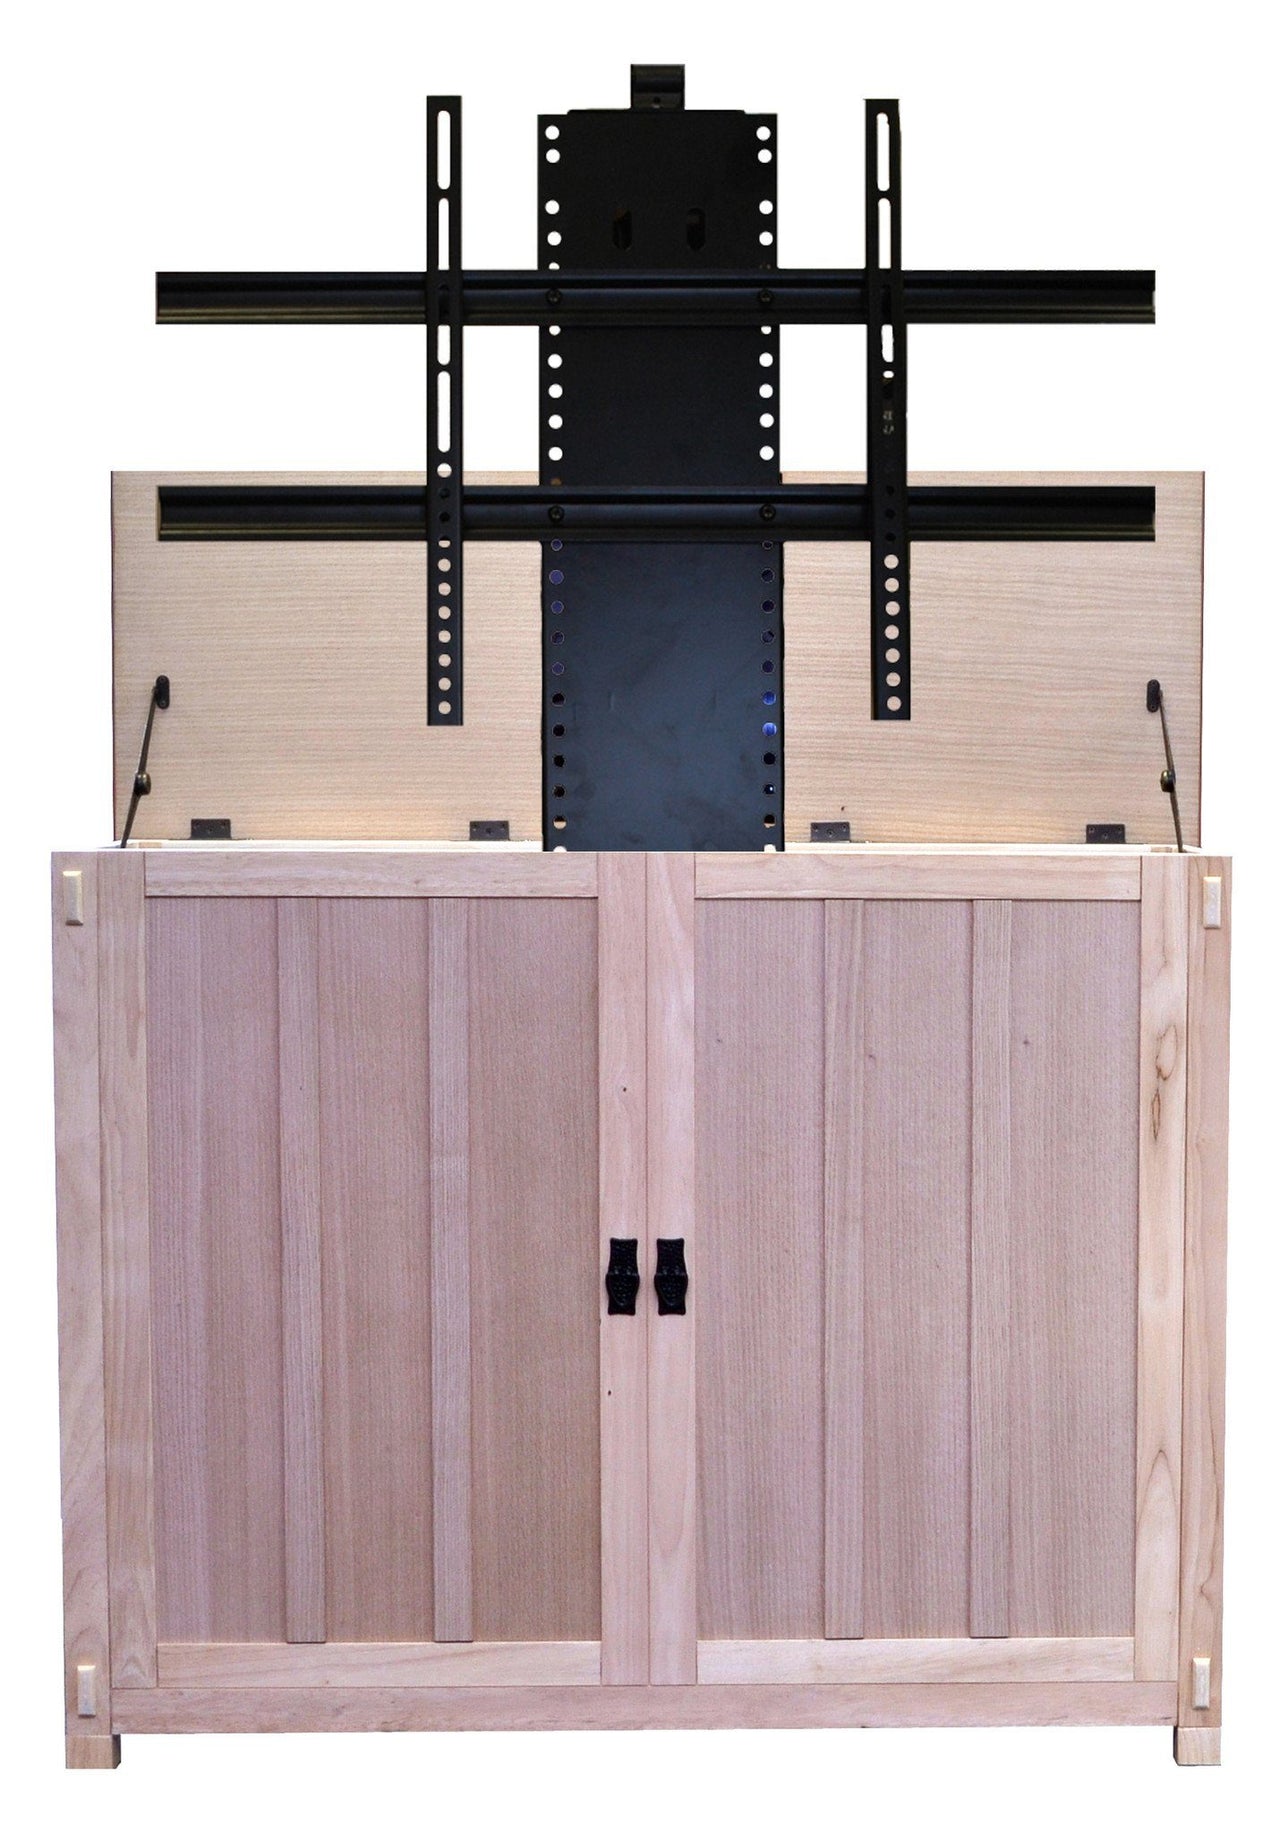 Touchstone Elevate - Oak Unfinished Lift Cabinets For Up To 42” Flat Screen Tv’S Tv Lift Cabinets Touchstone 